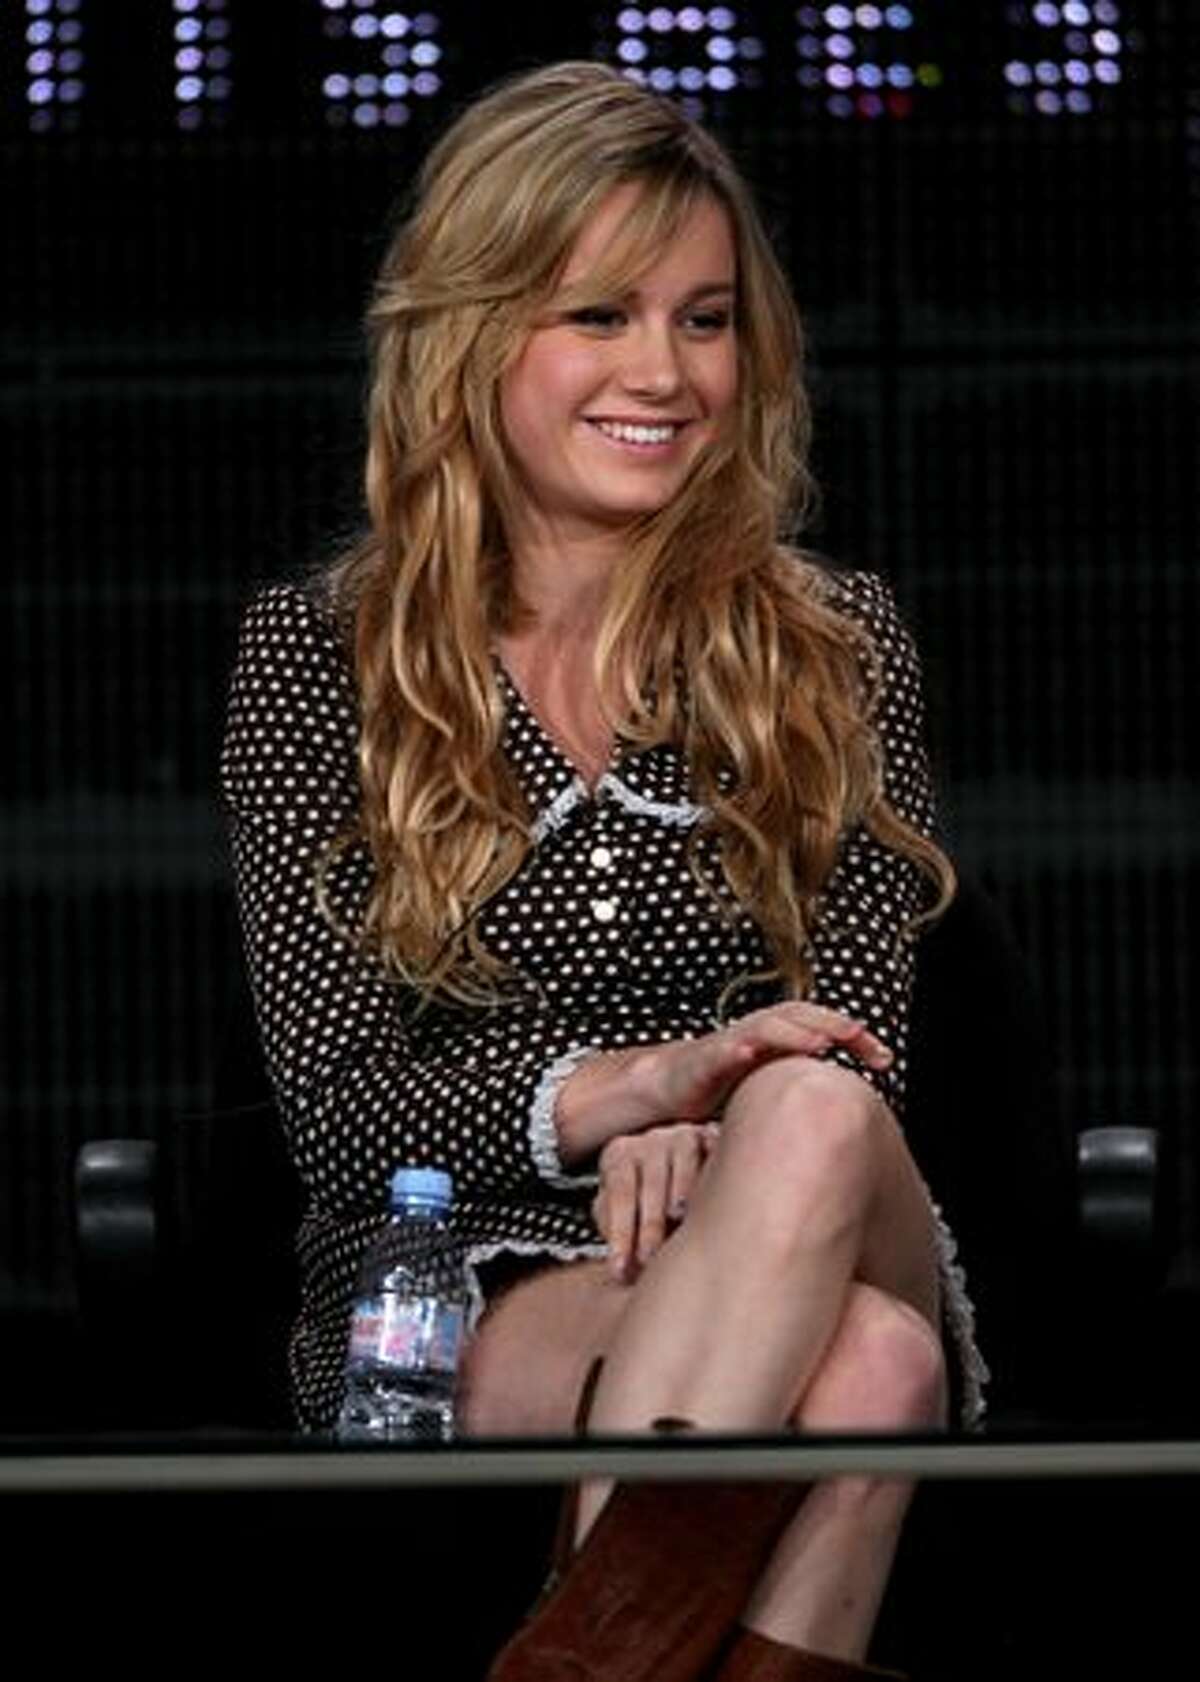 Actress Brie Larson speaks onstage at the Showtime "United States of Tara" Q&A portion of the 2010 Winter TCA Tour day 1 at the Langham Hotel on Jan. 9, 2010 in Pasadena, Calif.